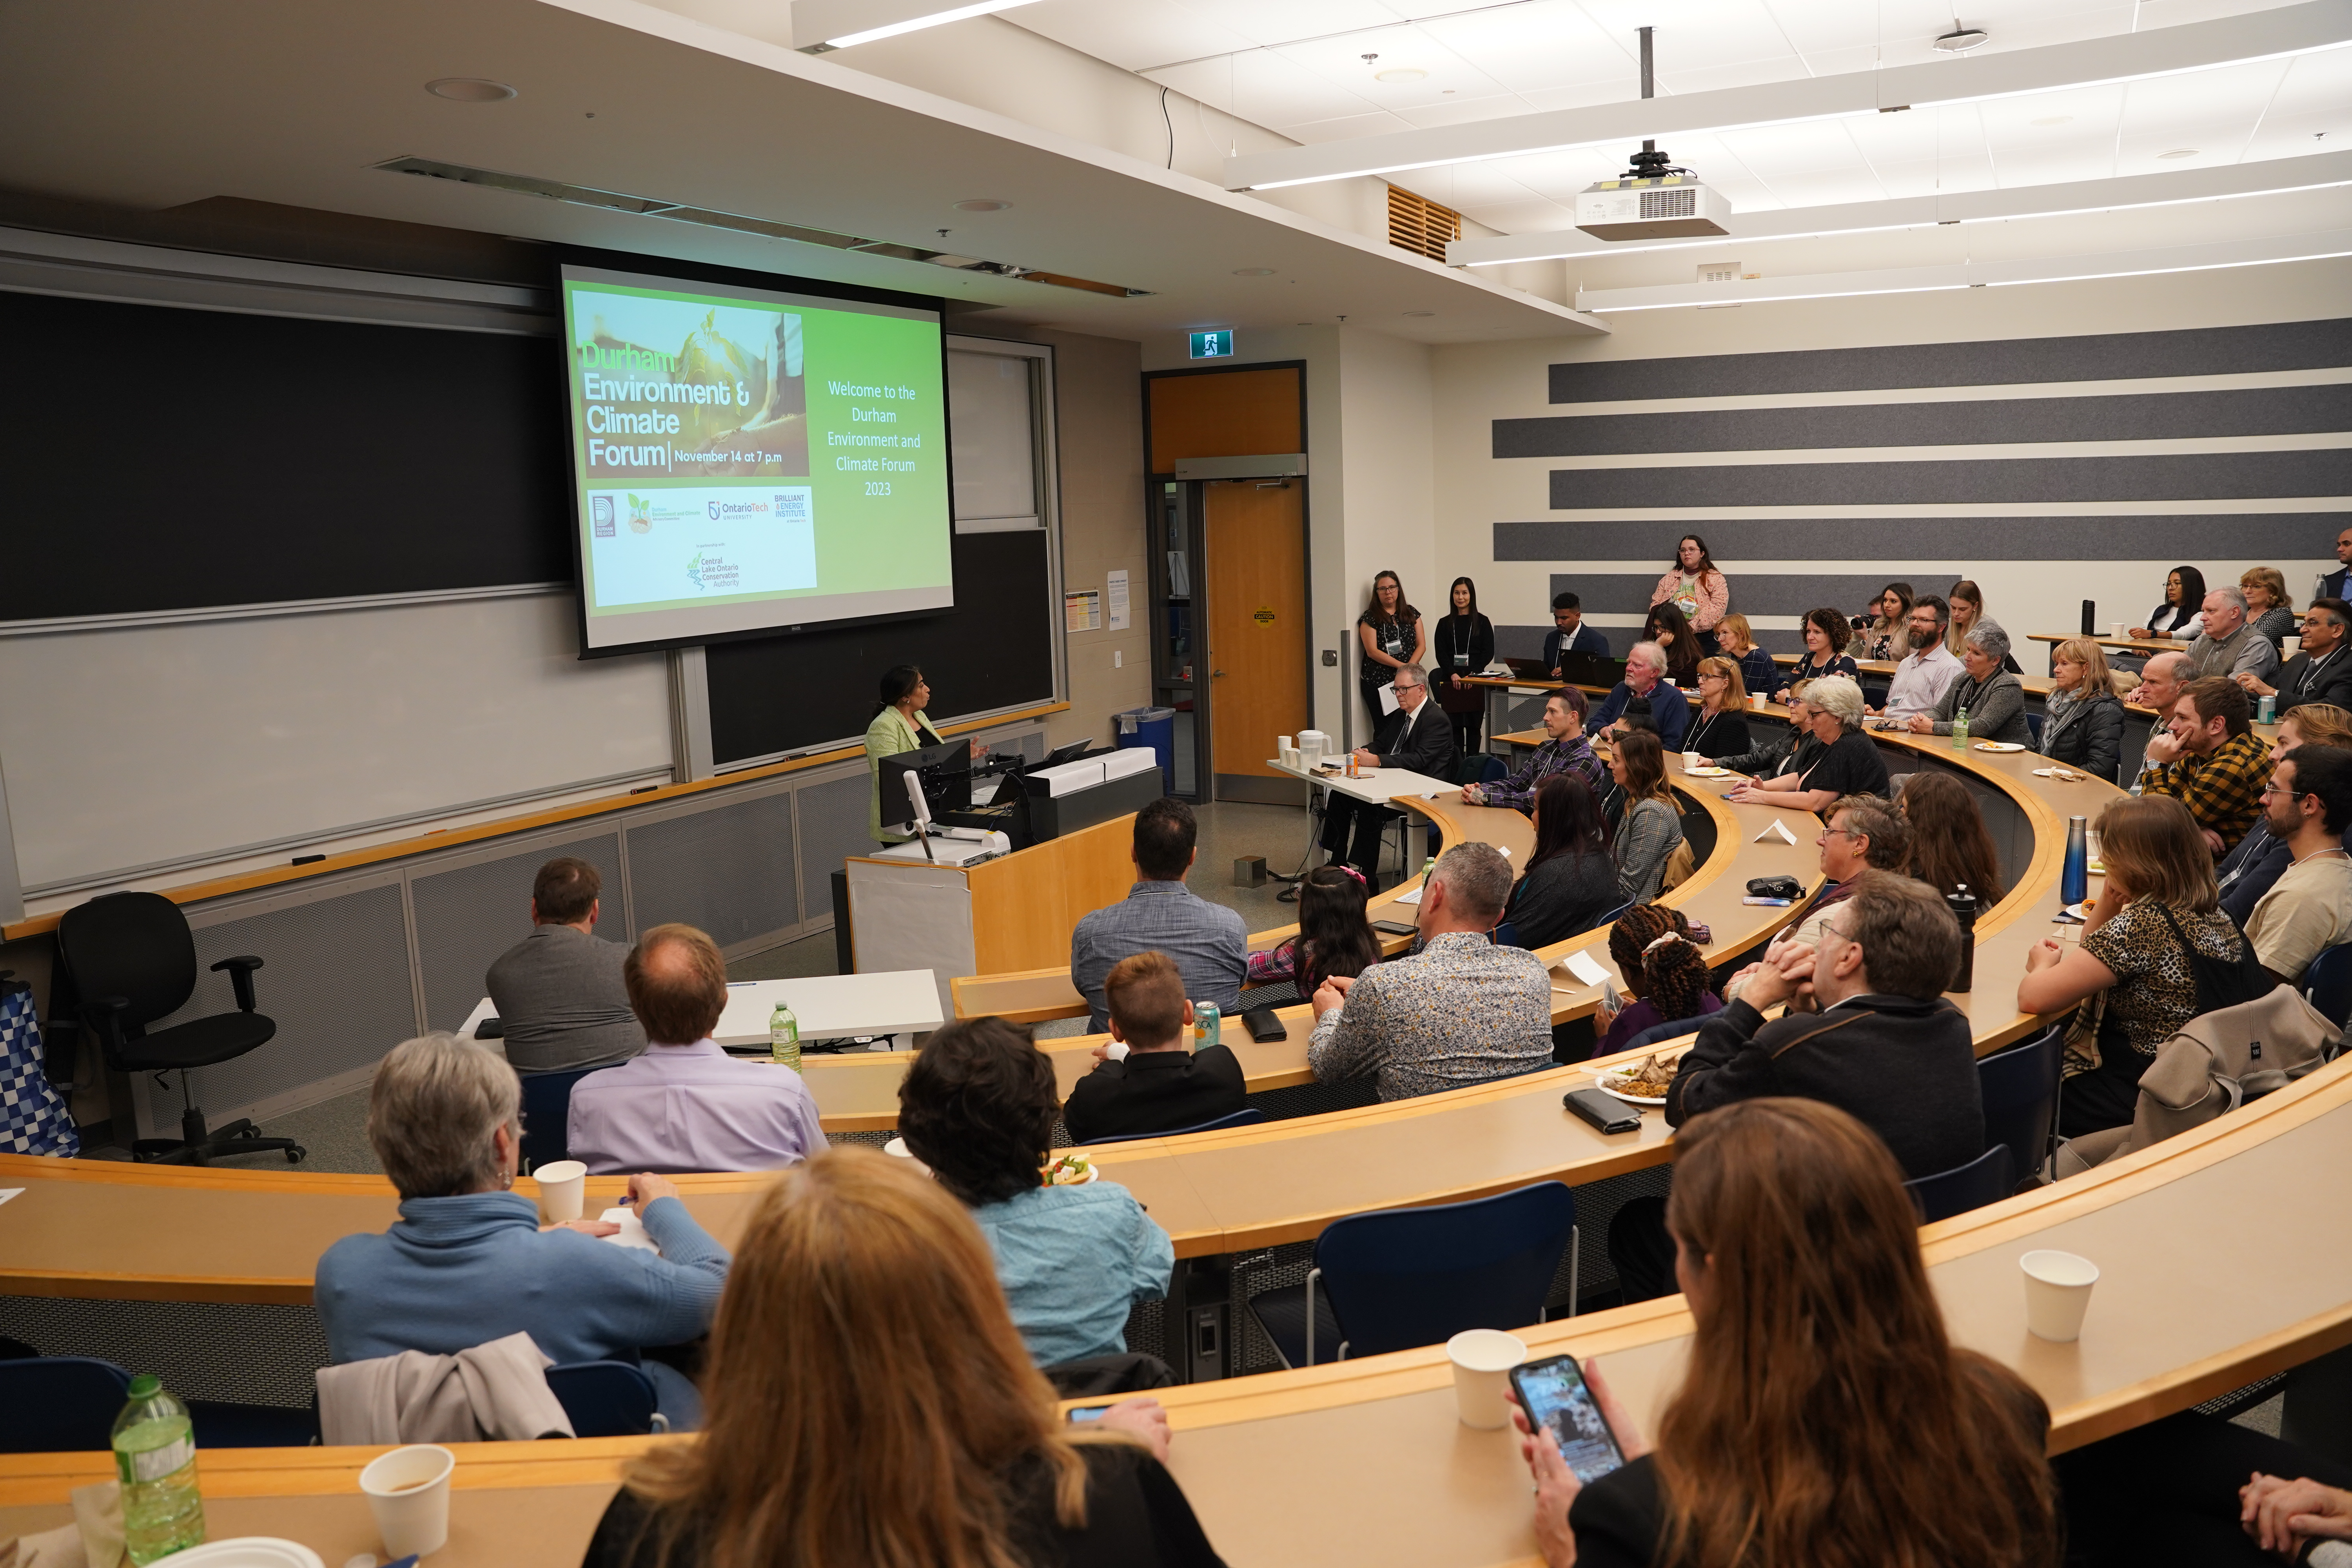 A woman stands at a podium with a presentation behind her in a full lecture room of people of all ages.